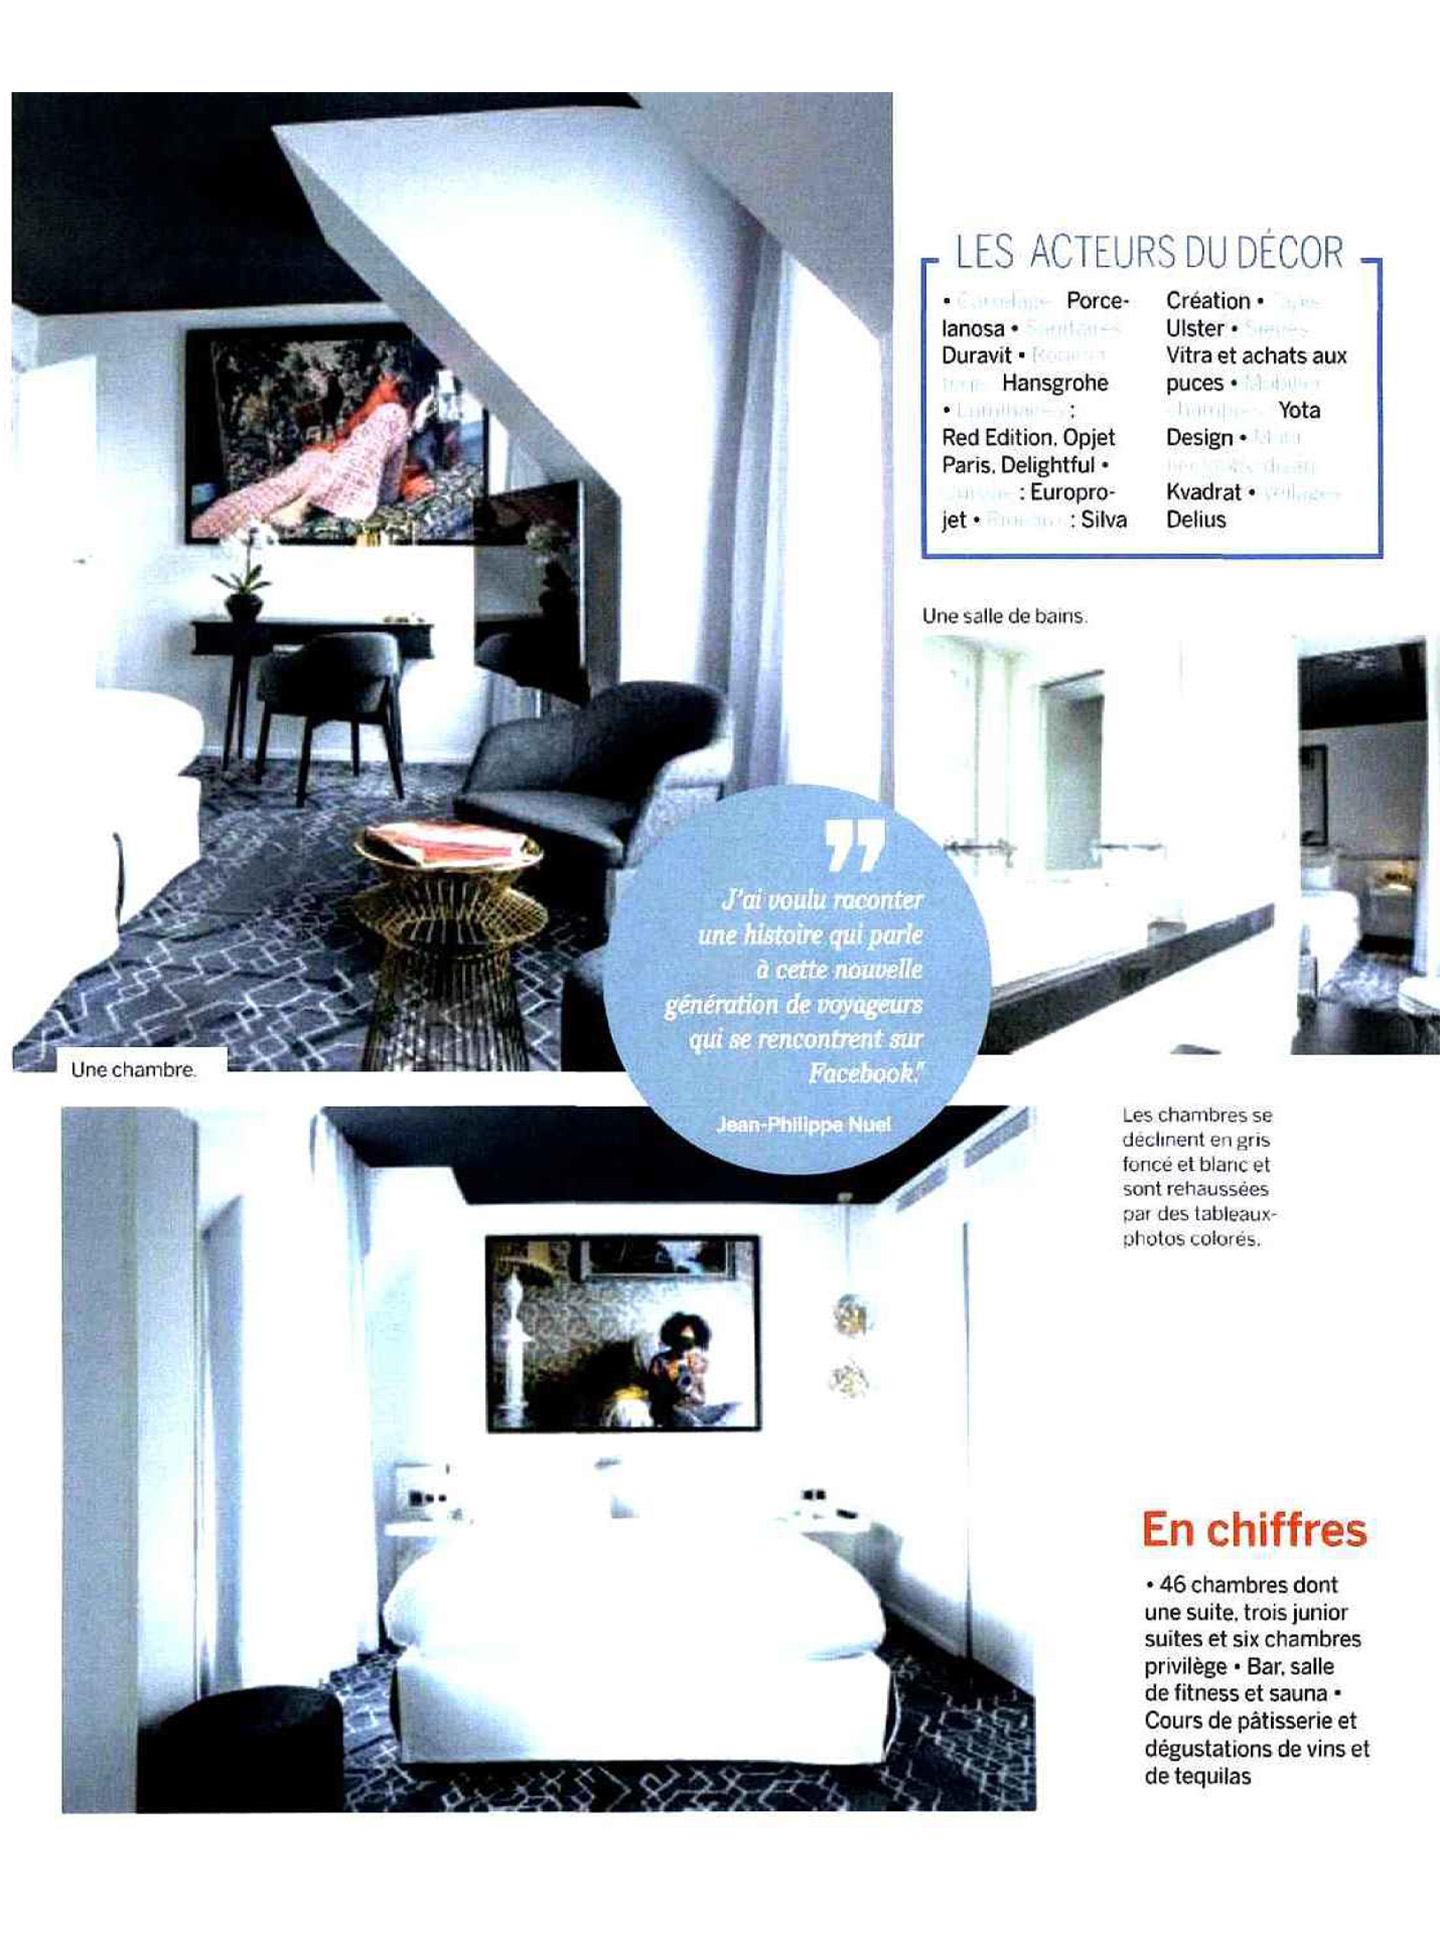 Article on the General realized by the studio jean-Philippe Nuel in the magazine Hotellerie restauration, new lifestyle hotel, luxury interior design, paris center, french luxury hotel